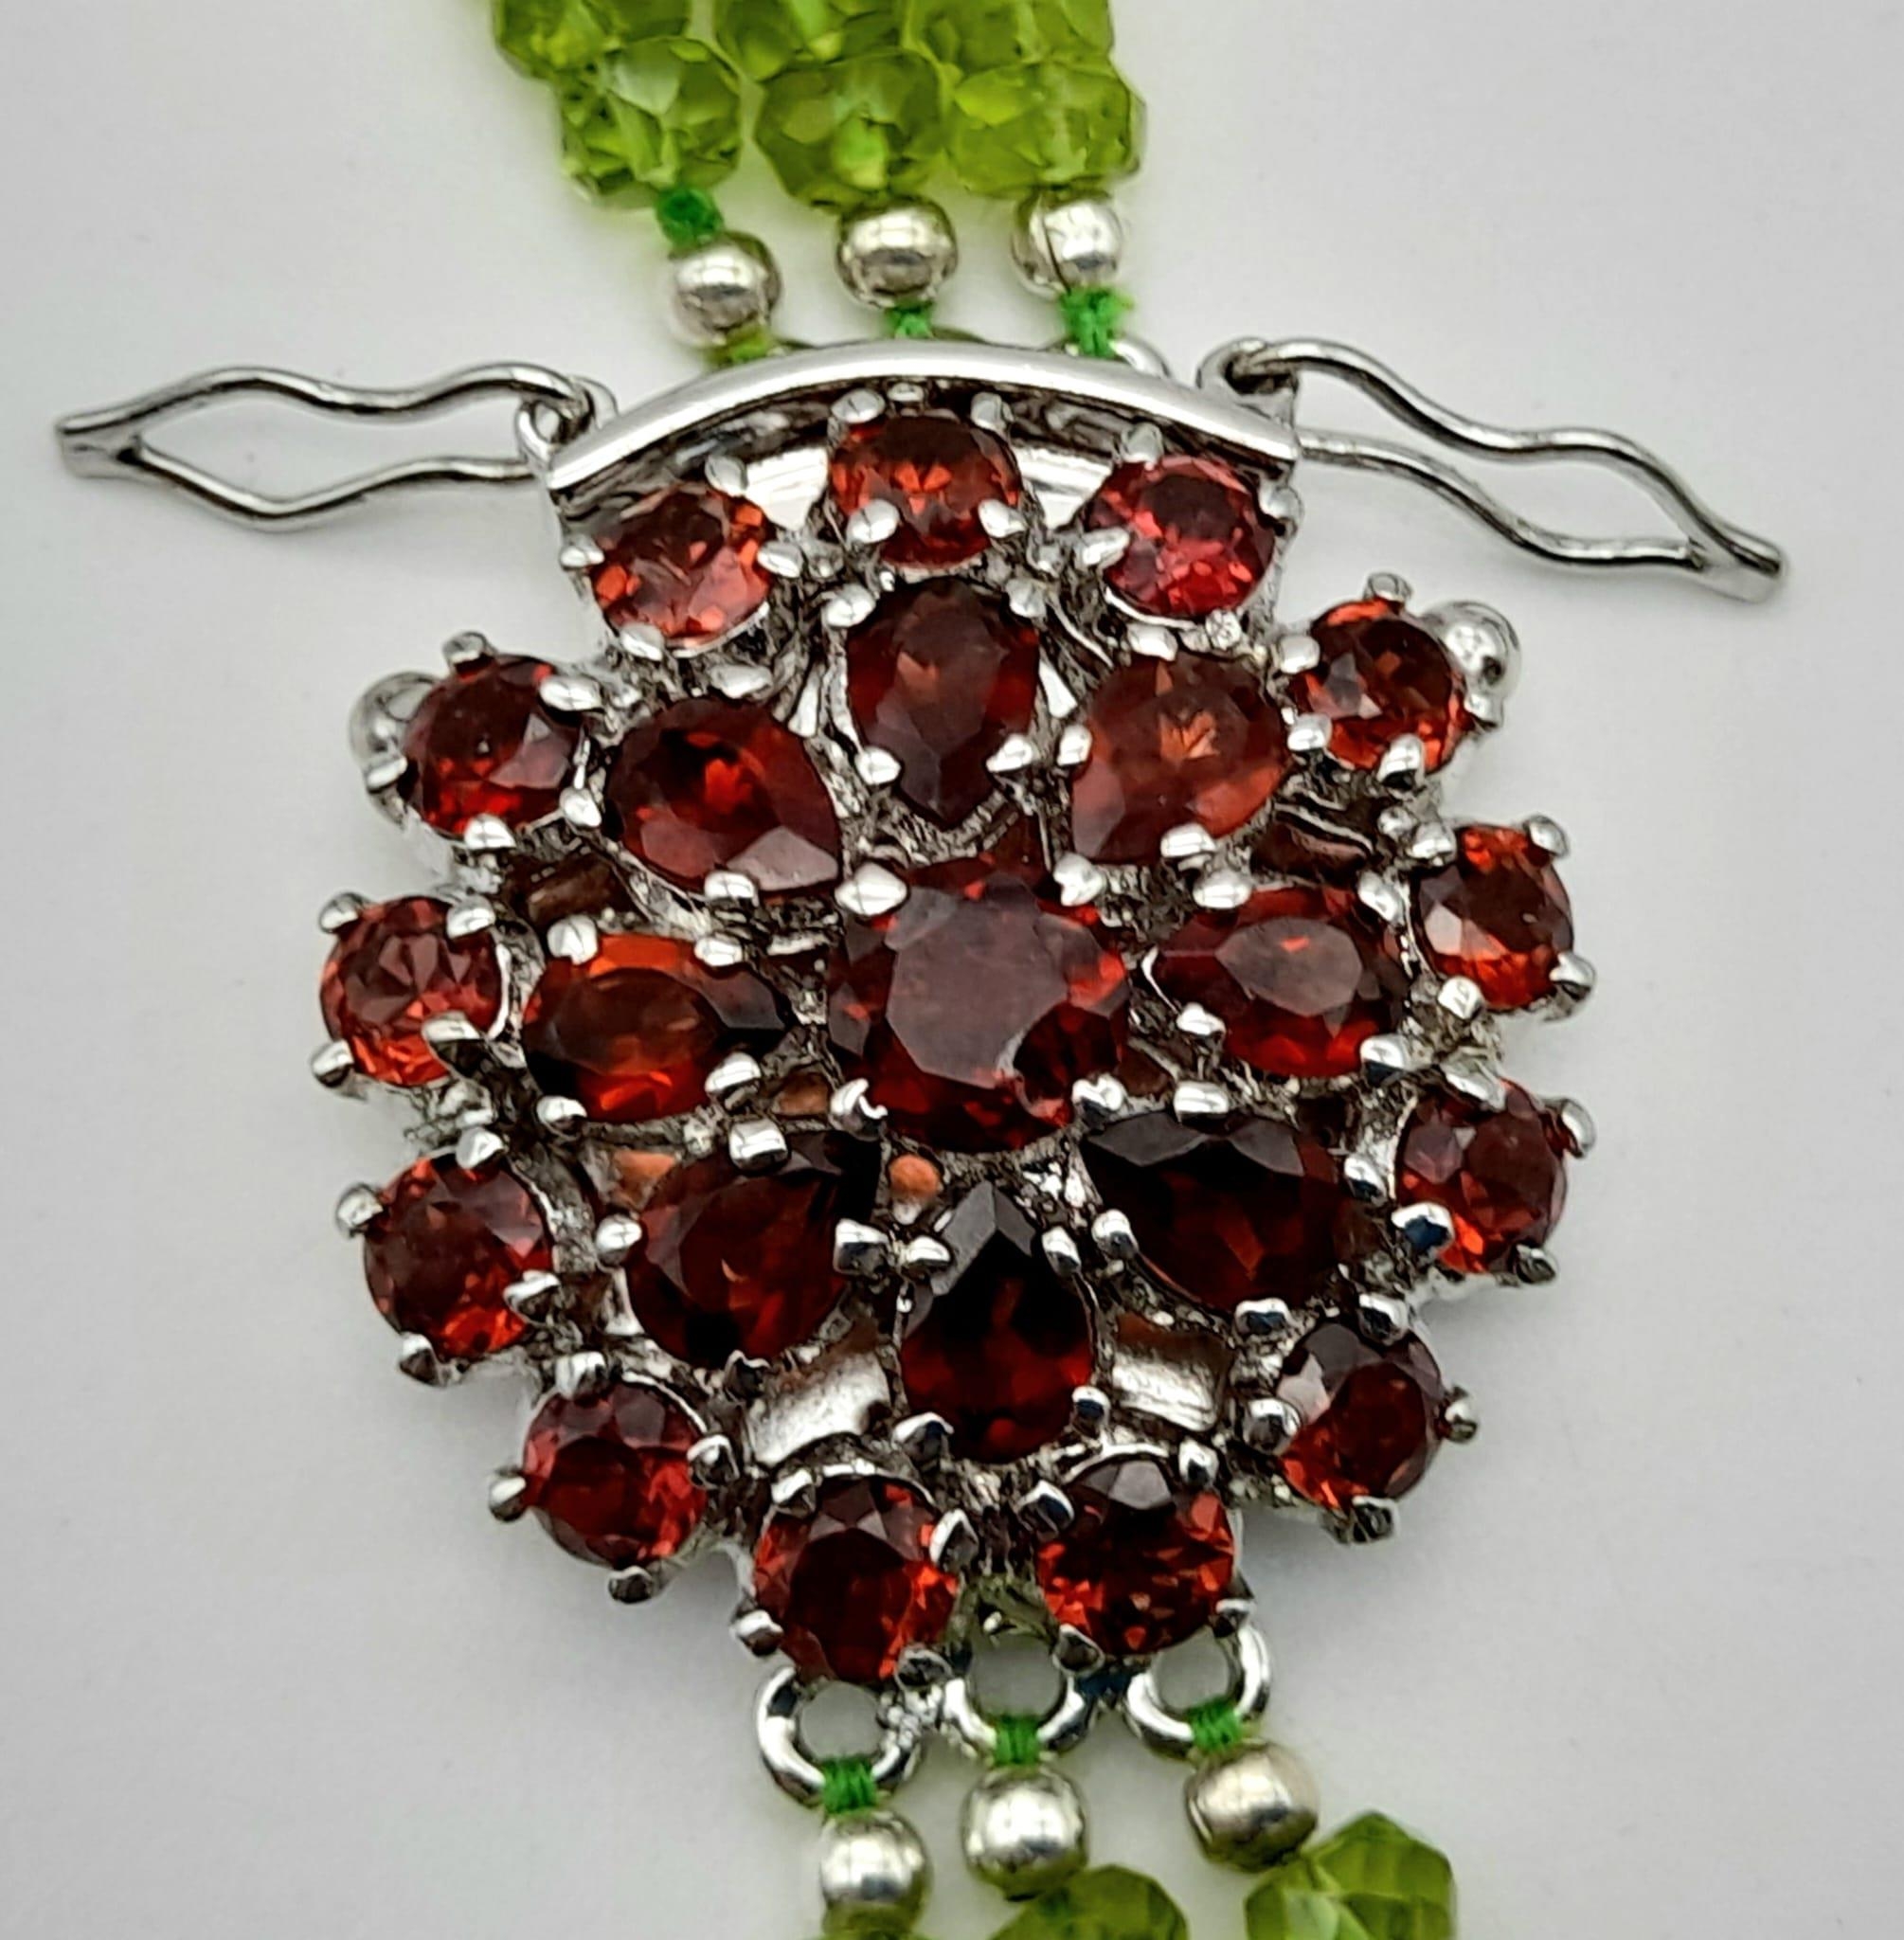 3 Row Peridot Gemstone Necklace with Garnet Clasp in 925 Silver, 440cts in total , Comes on side - Image 3 of 4